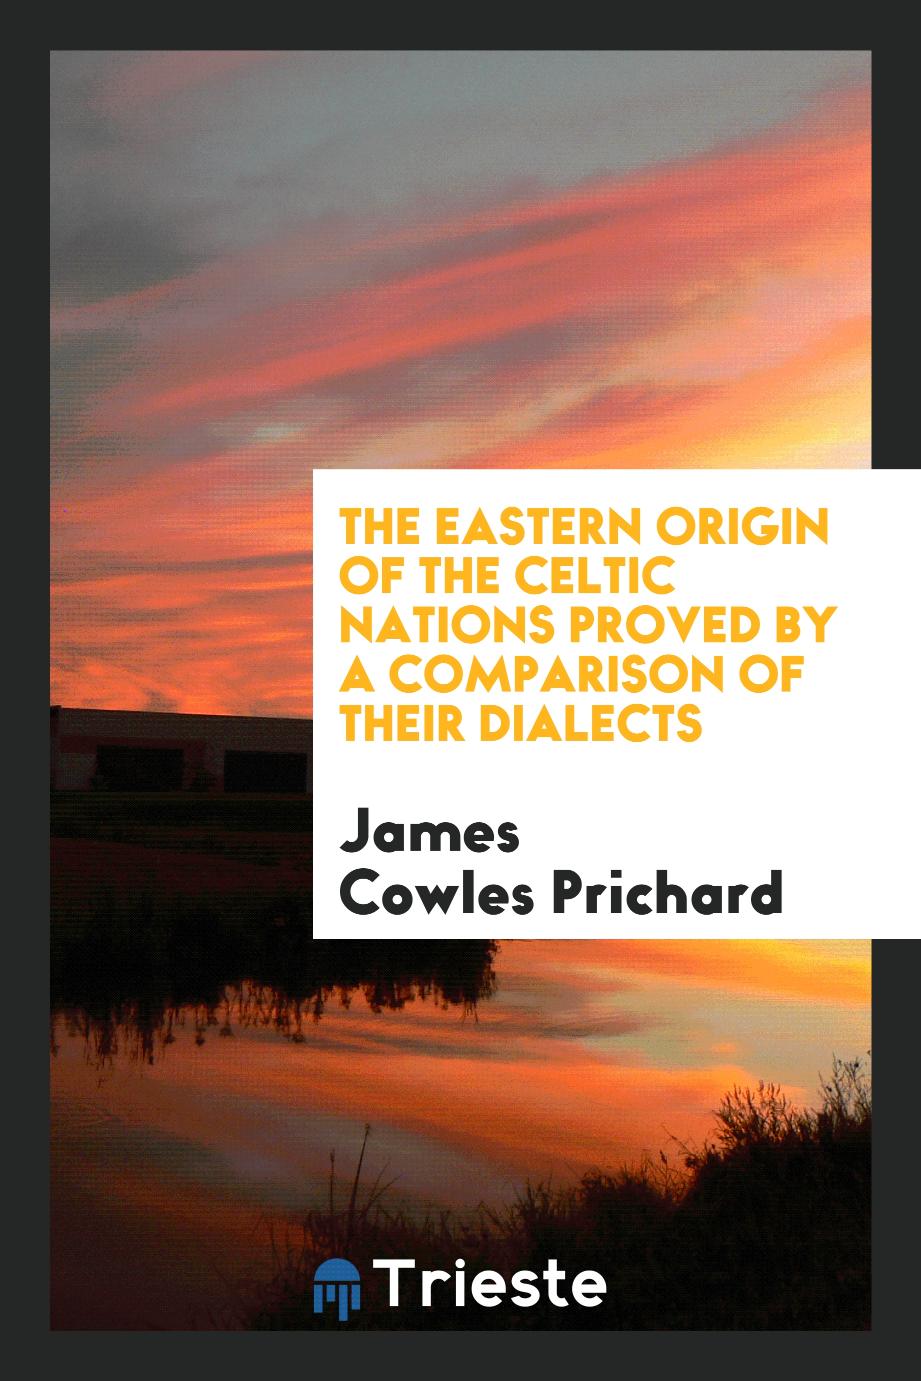 The Eastern Origin of the Celtic Nations Proved by a Comparison of Their Dialects